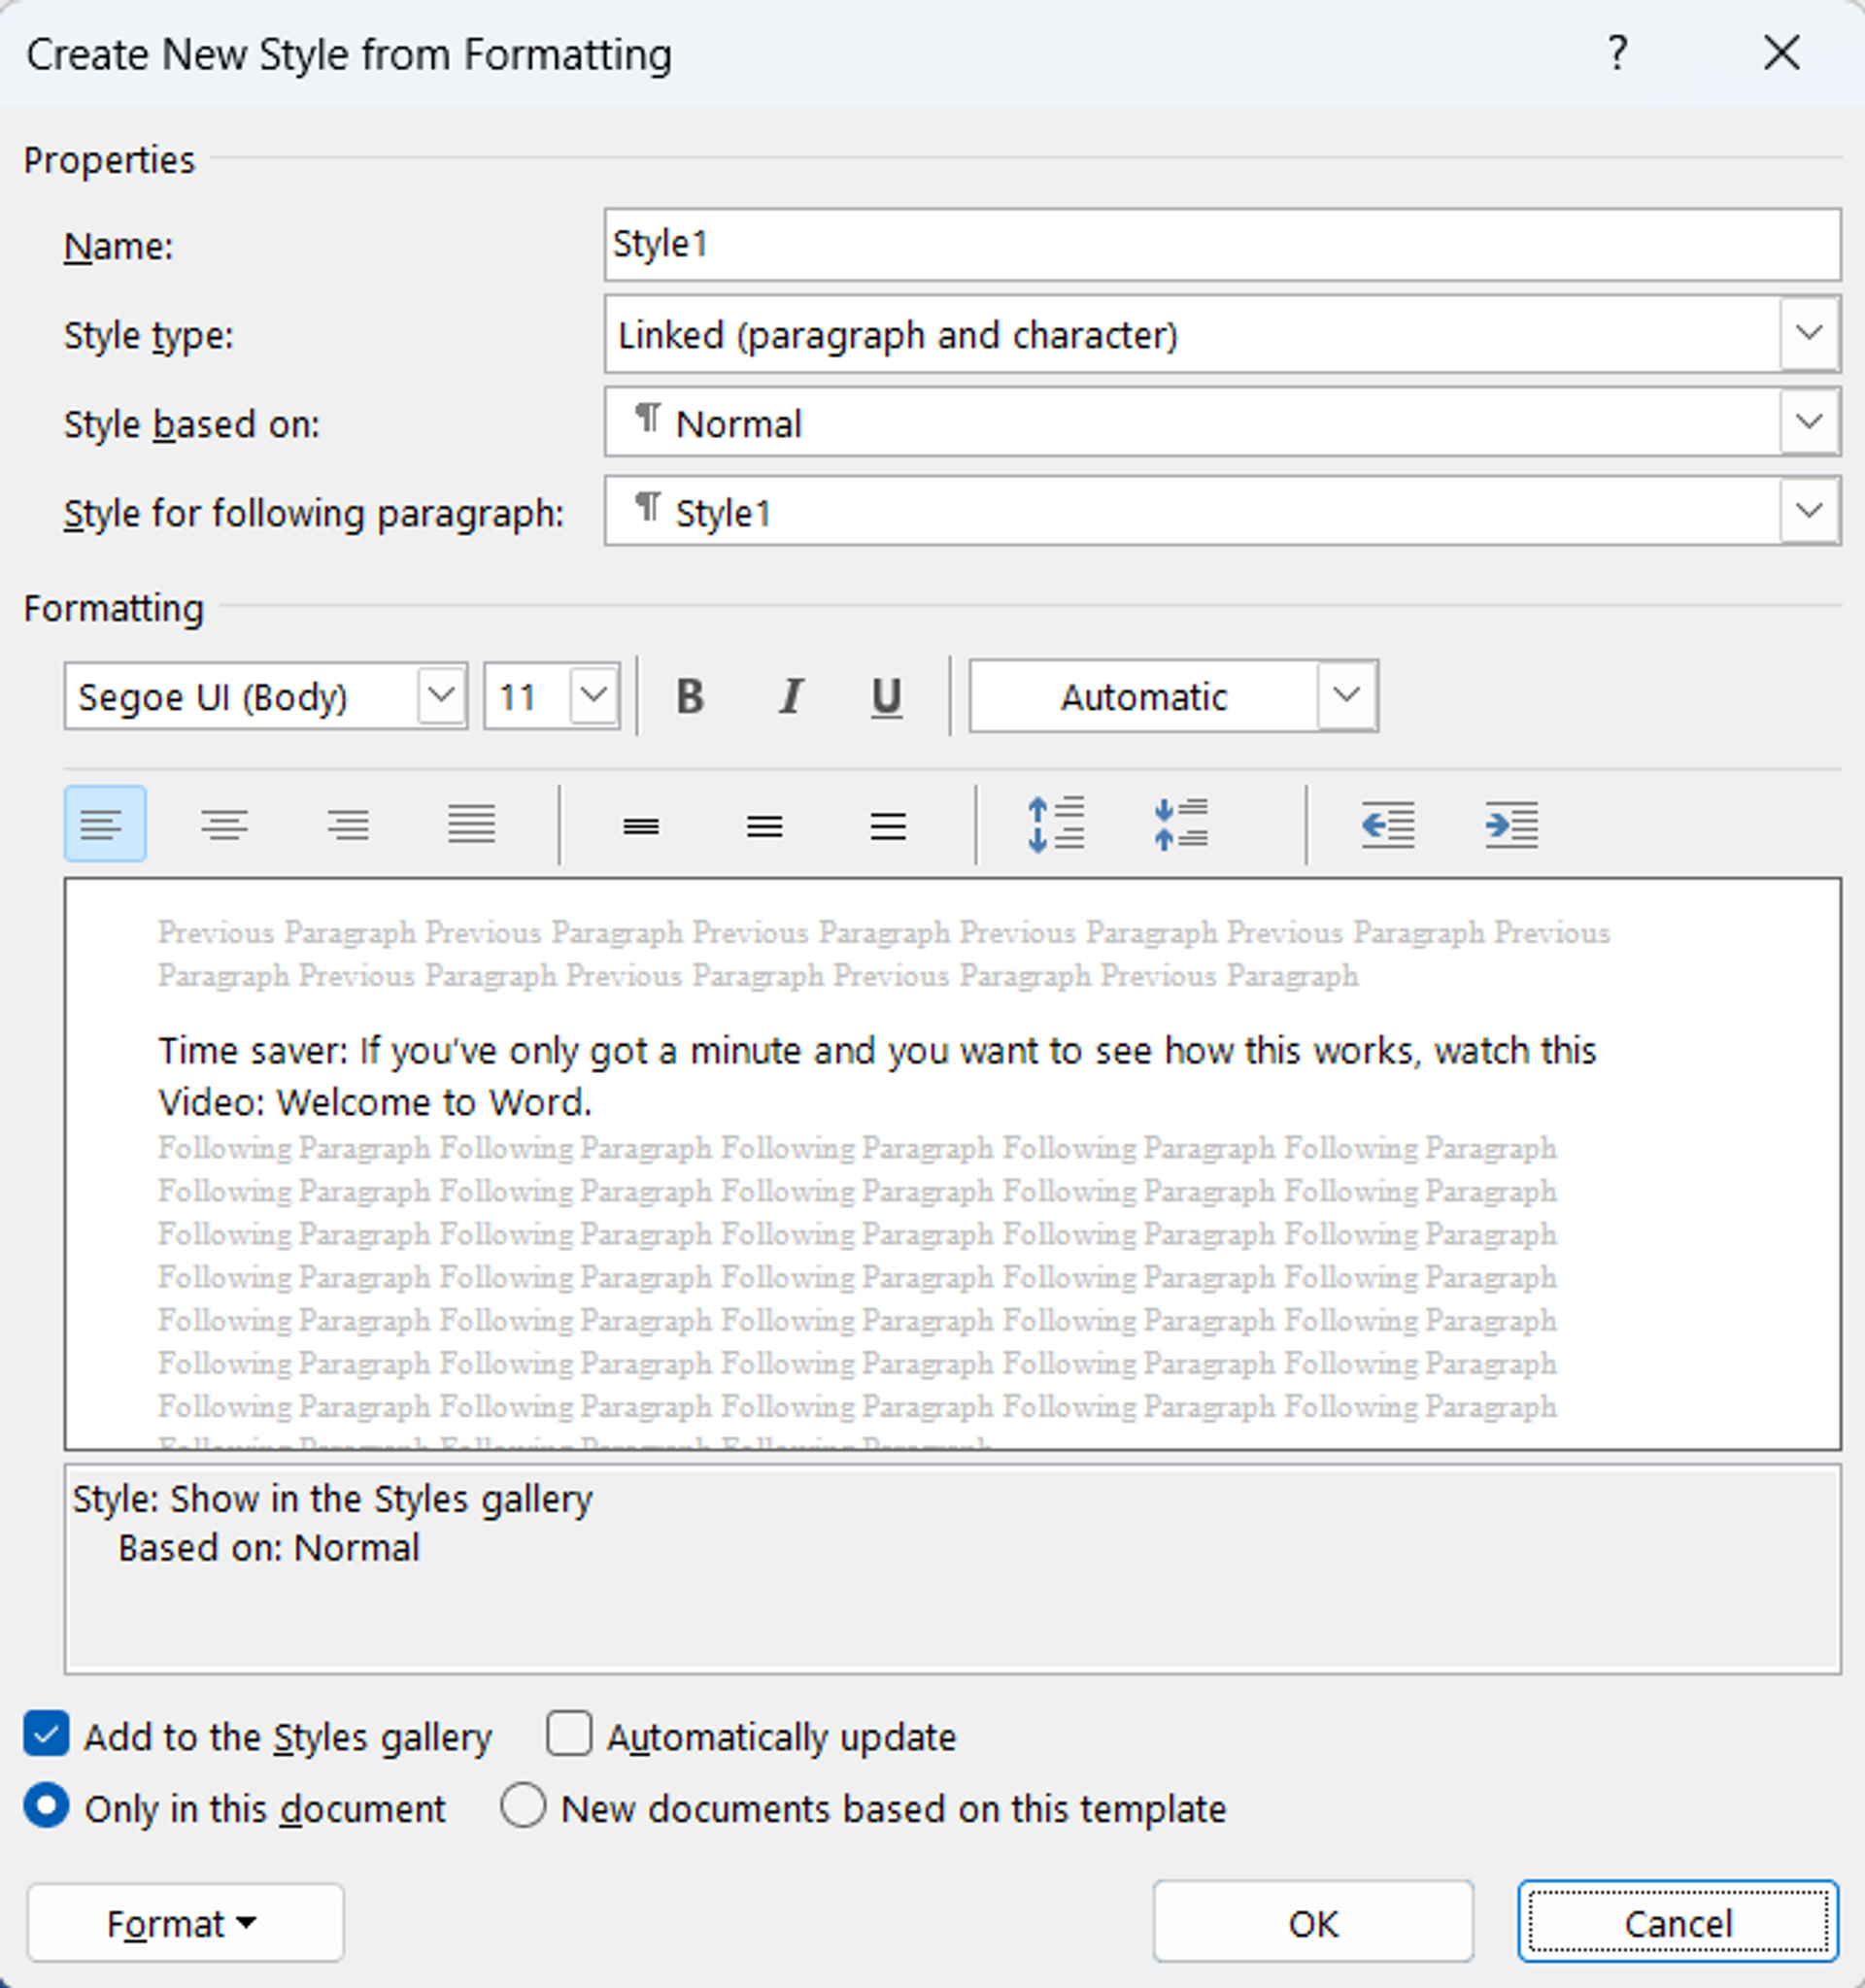 Options for creating a new style from formatting in MS Word 